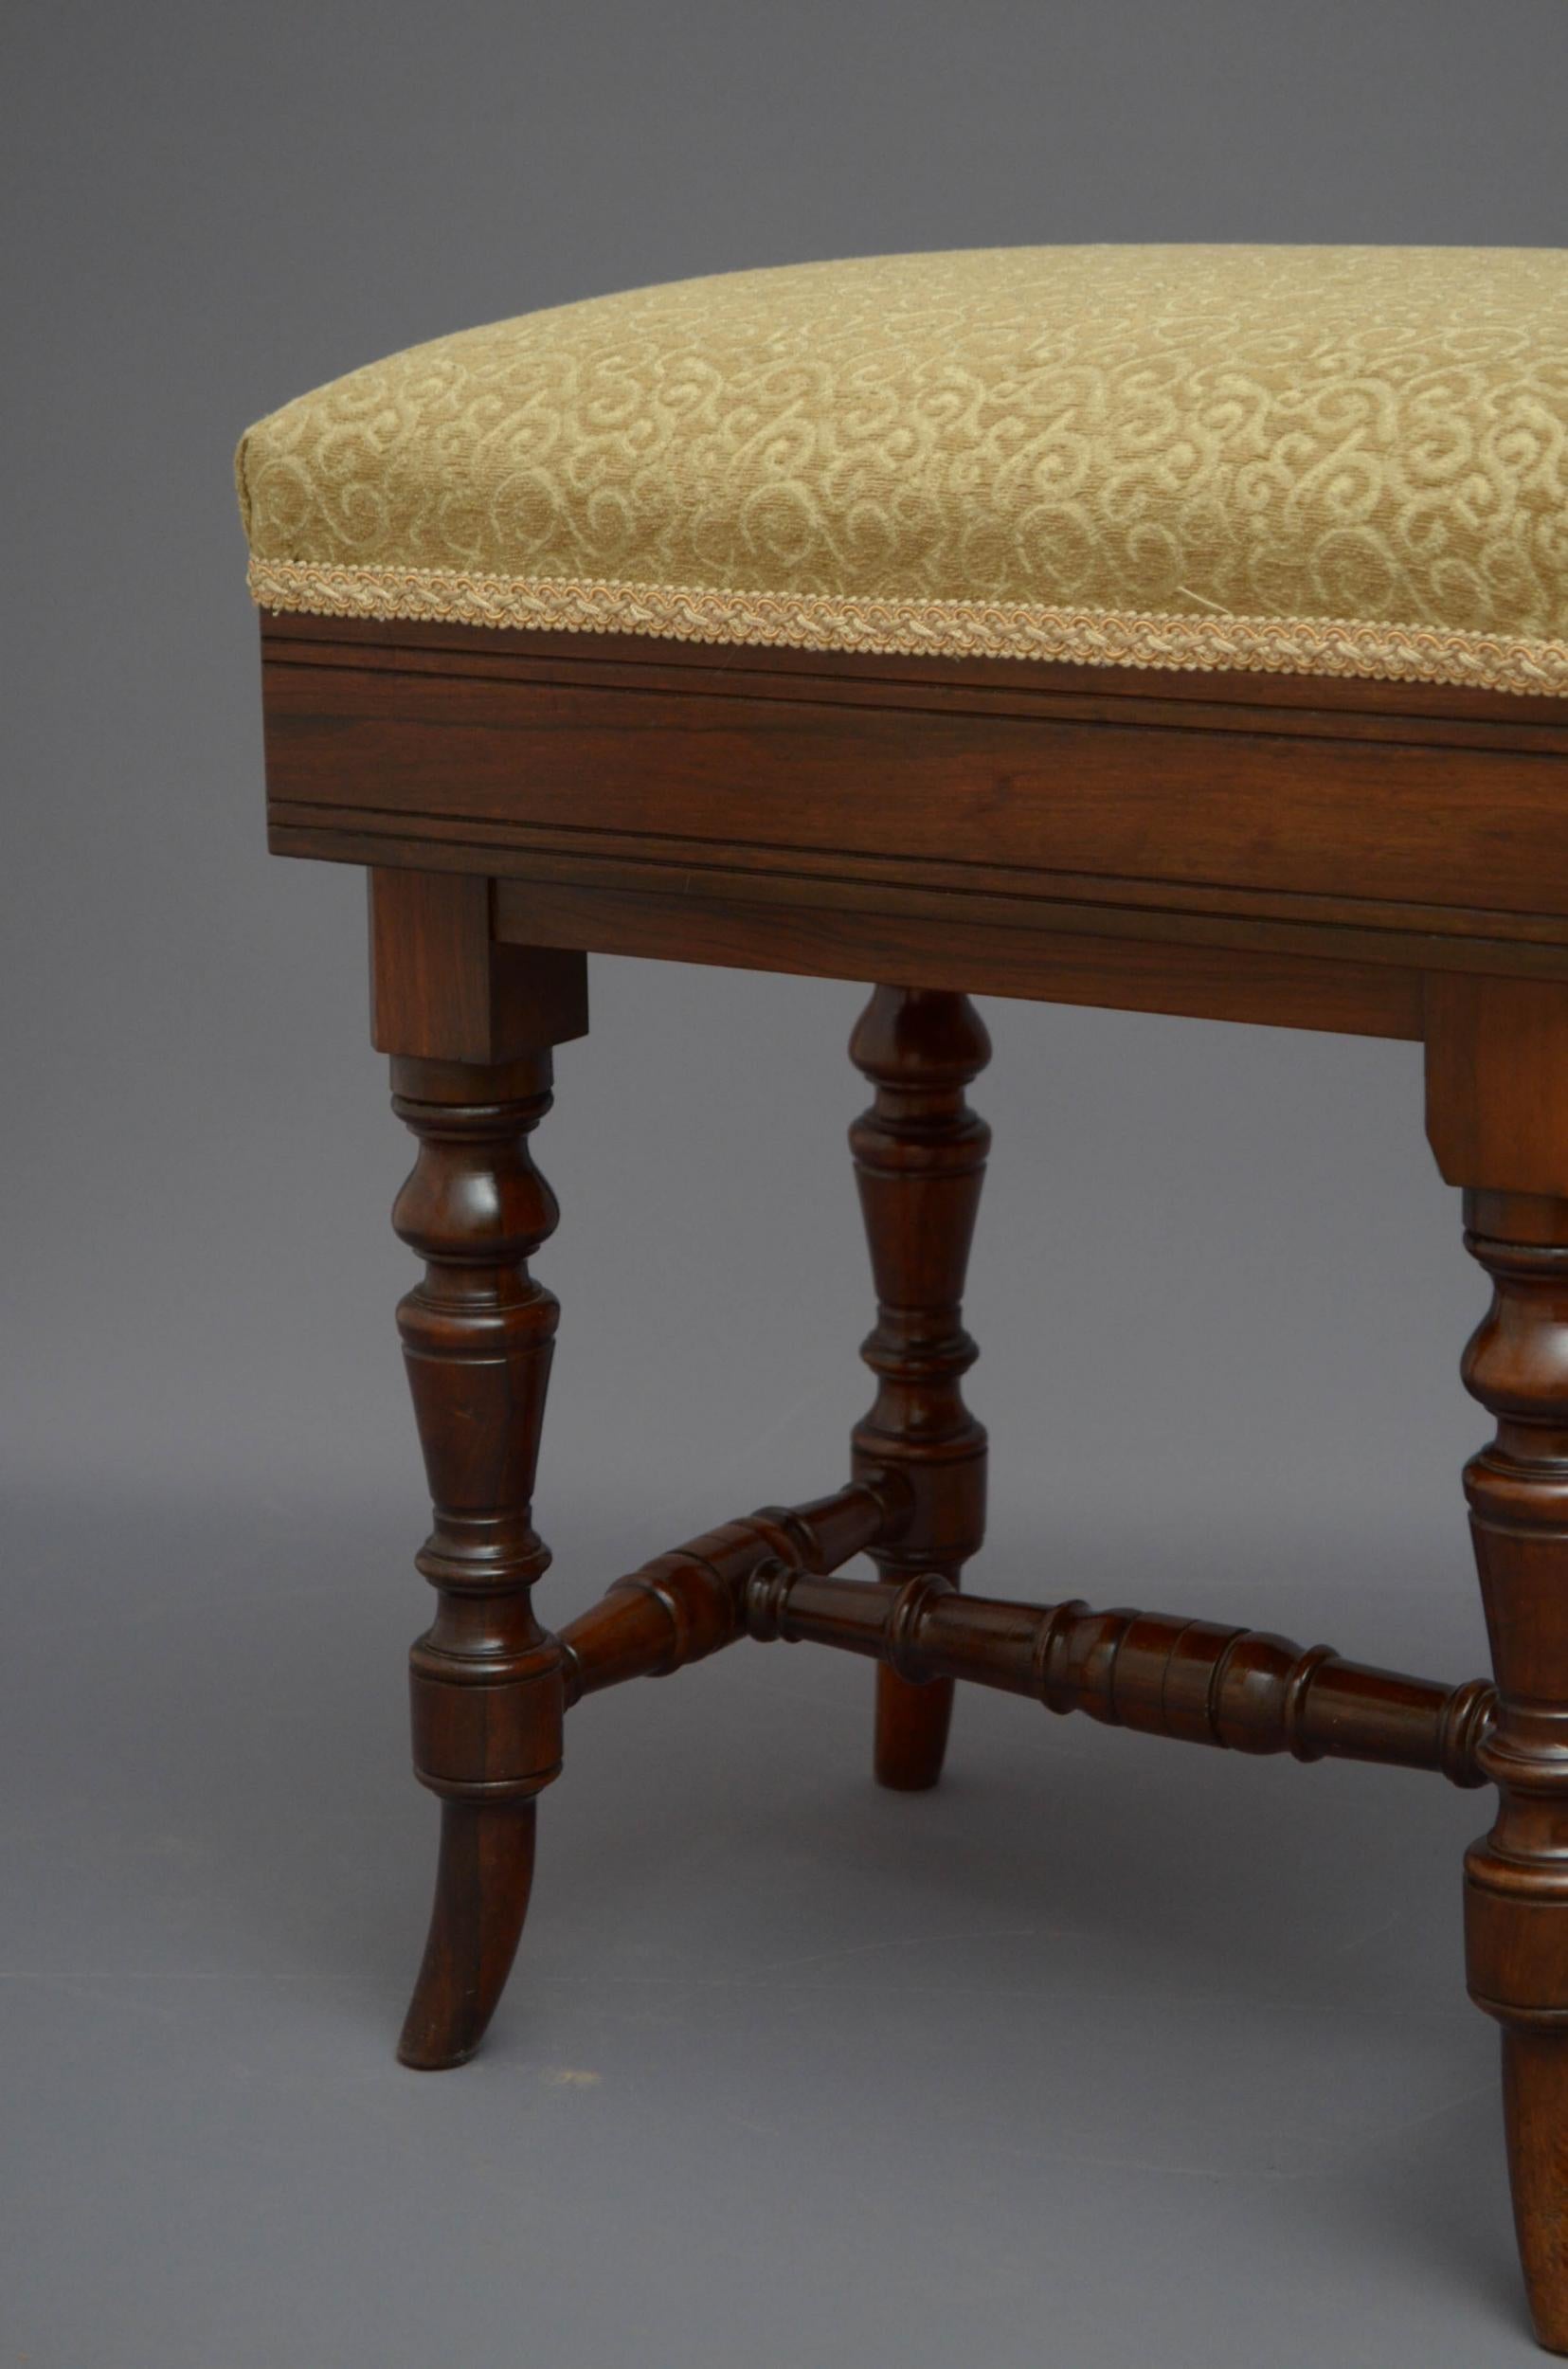 Superb Quality Victorian Stool in Rosewood In Good Condition For Sale In Whaley Bridge, GB